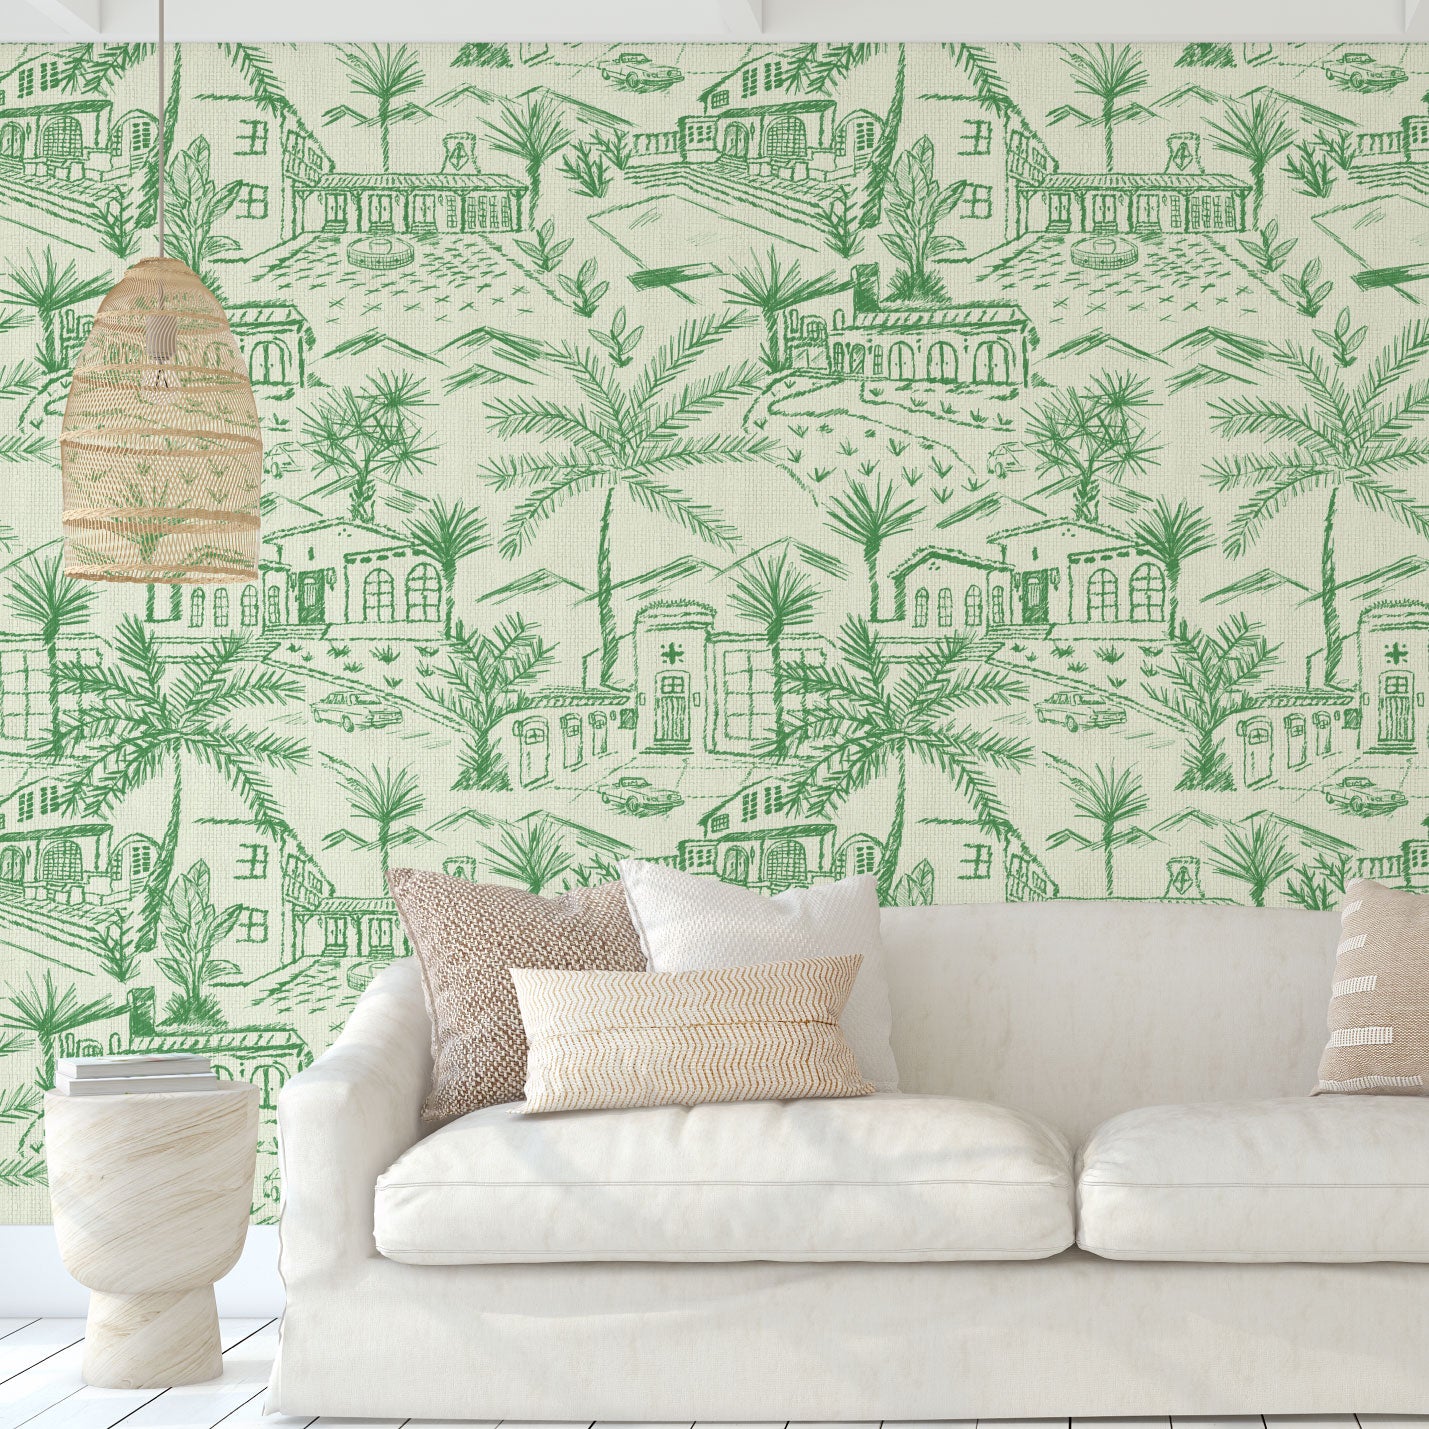 Paperweave paper weave printed modern toile design featuring a 2 color print with Spanish style houses, variety of palm trees and tropical and desert inspired plants, massive pools, vintage cars and fountains with mountains in the background living room